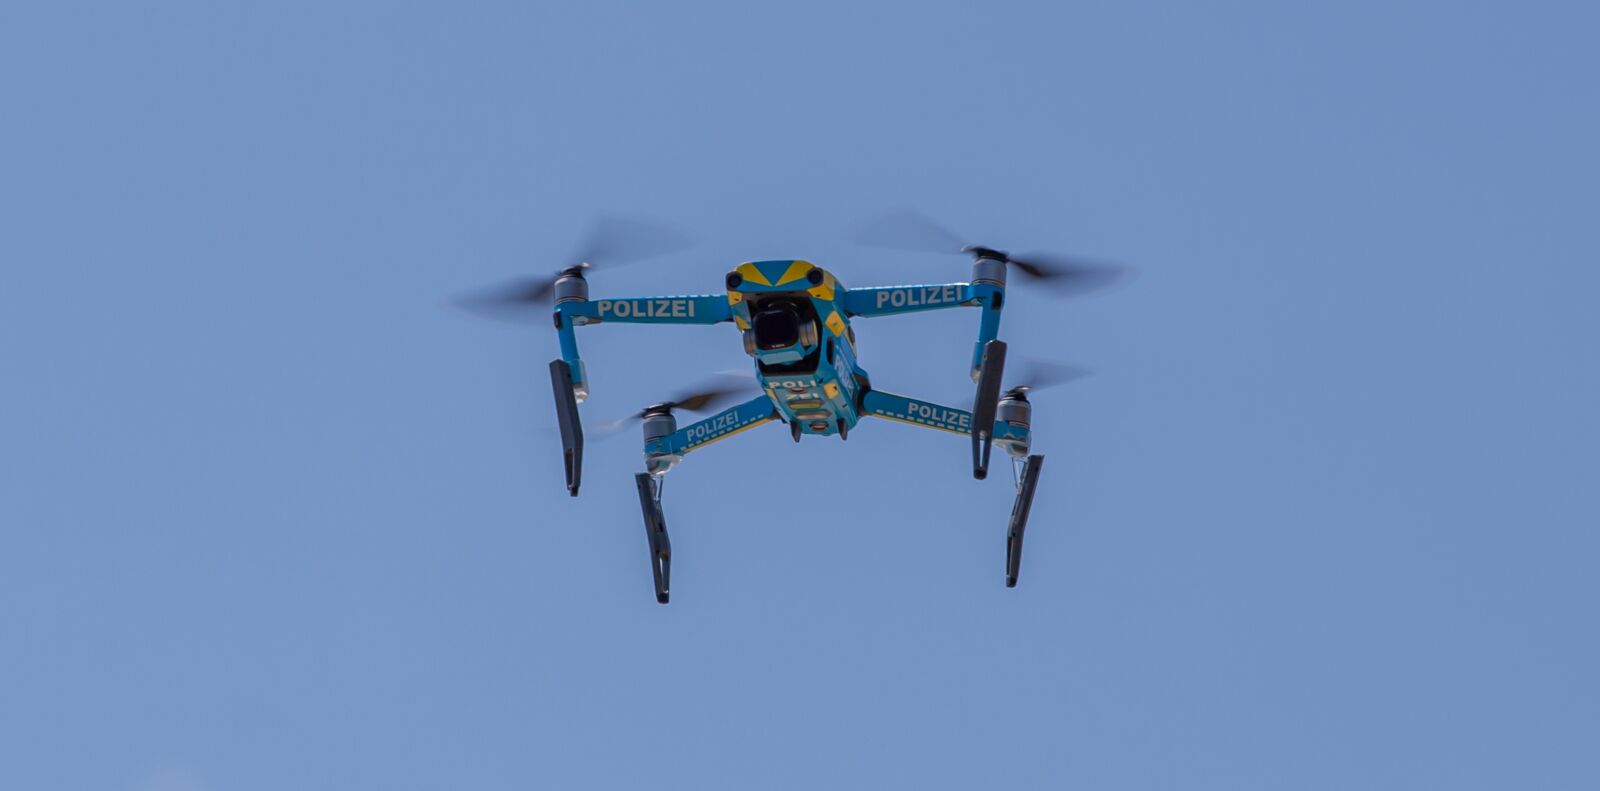 Canon EOS 5D Mark II + Canon EF 70-200mm F4L USM sample photo. Drone, flying camera, police photography